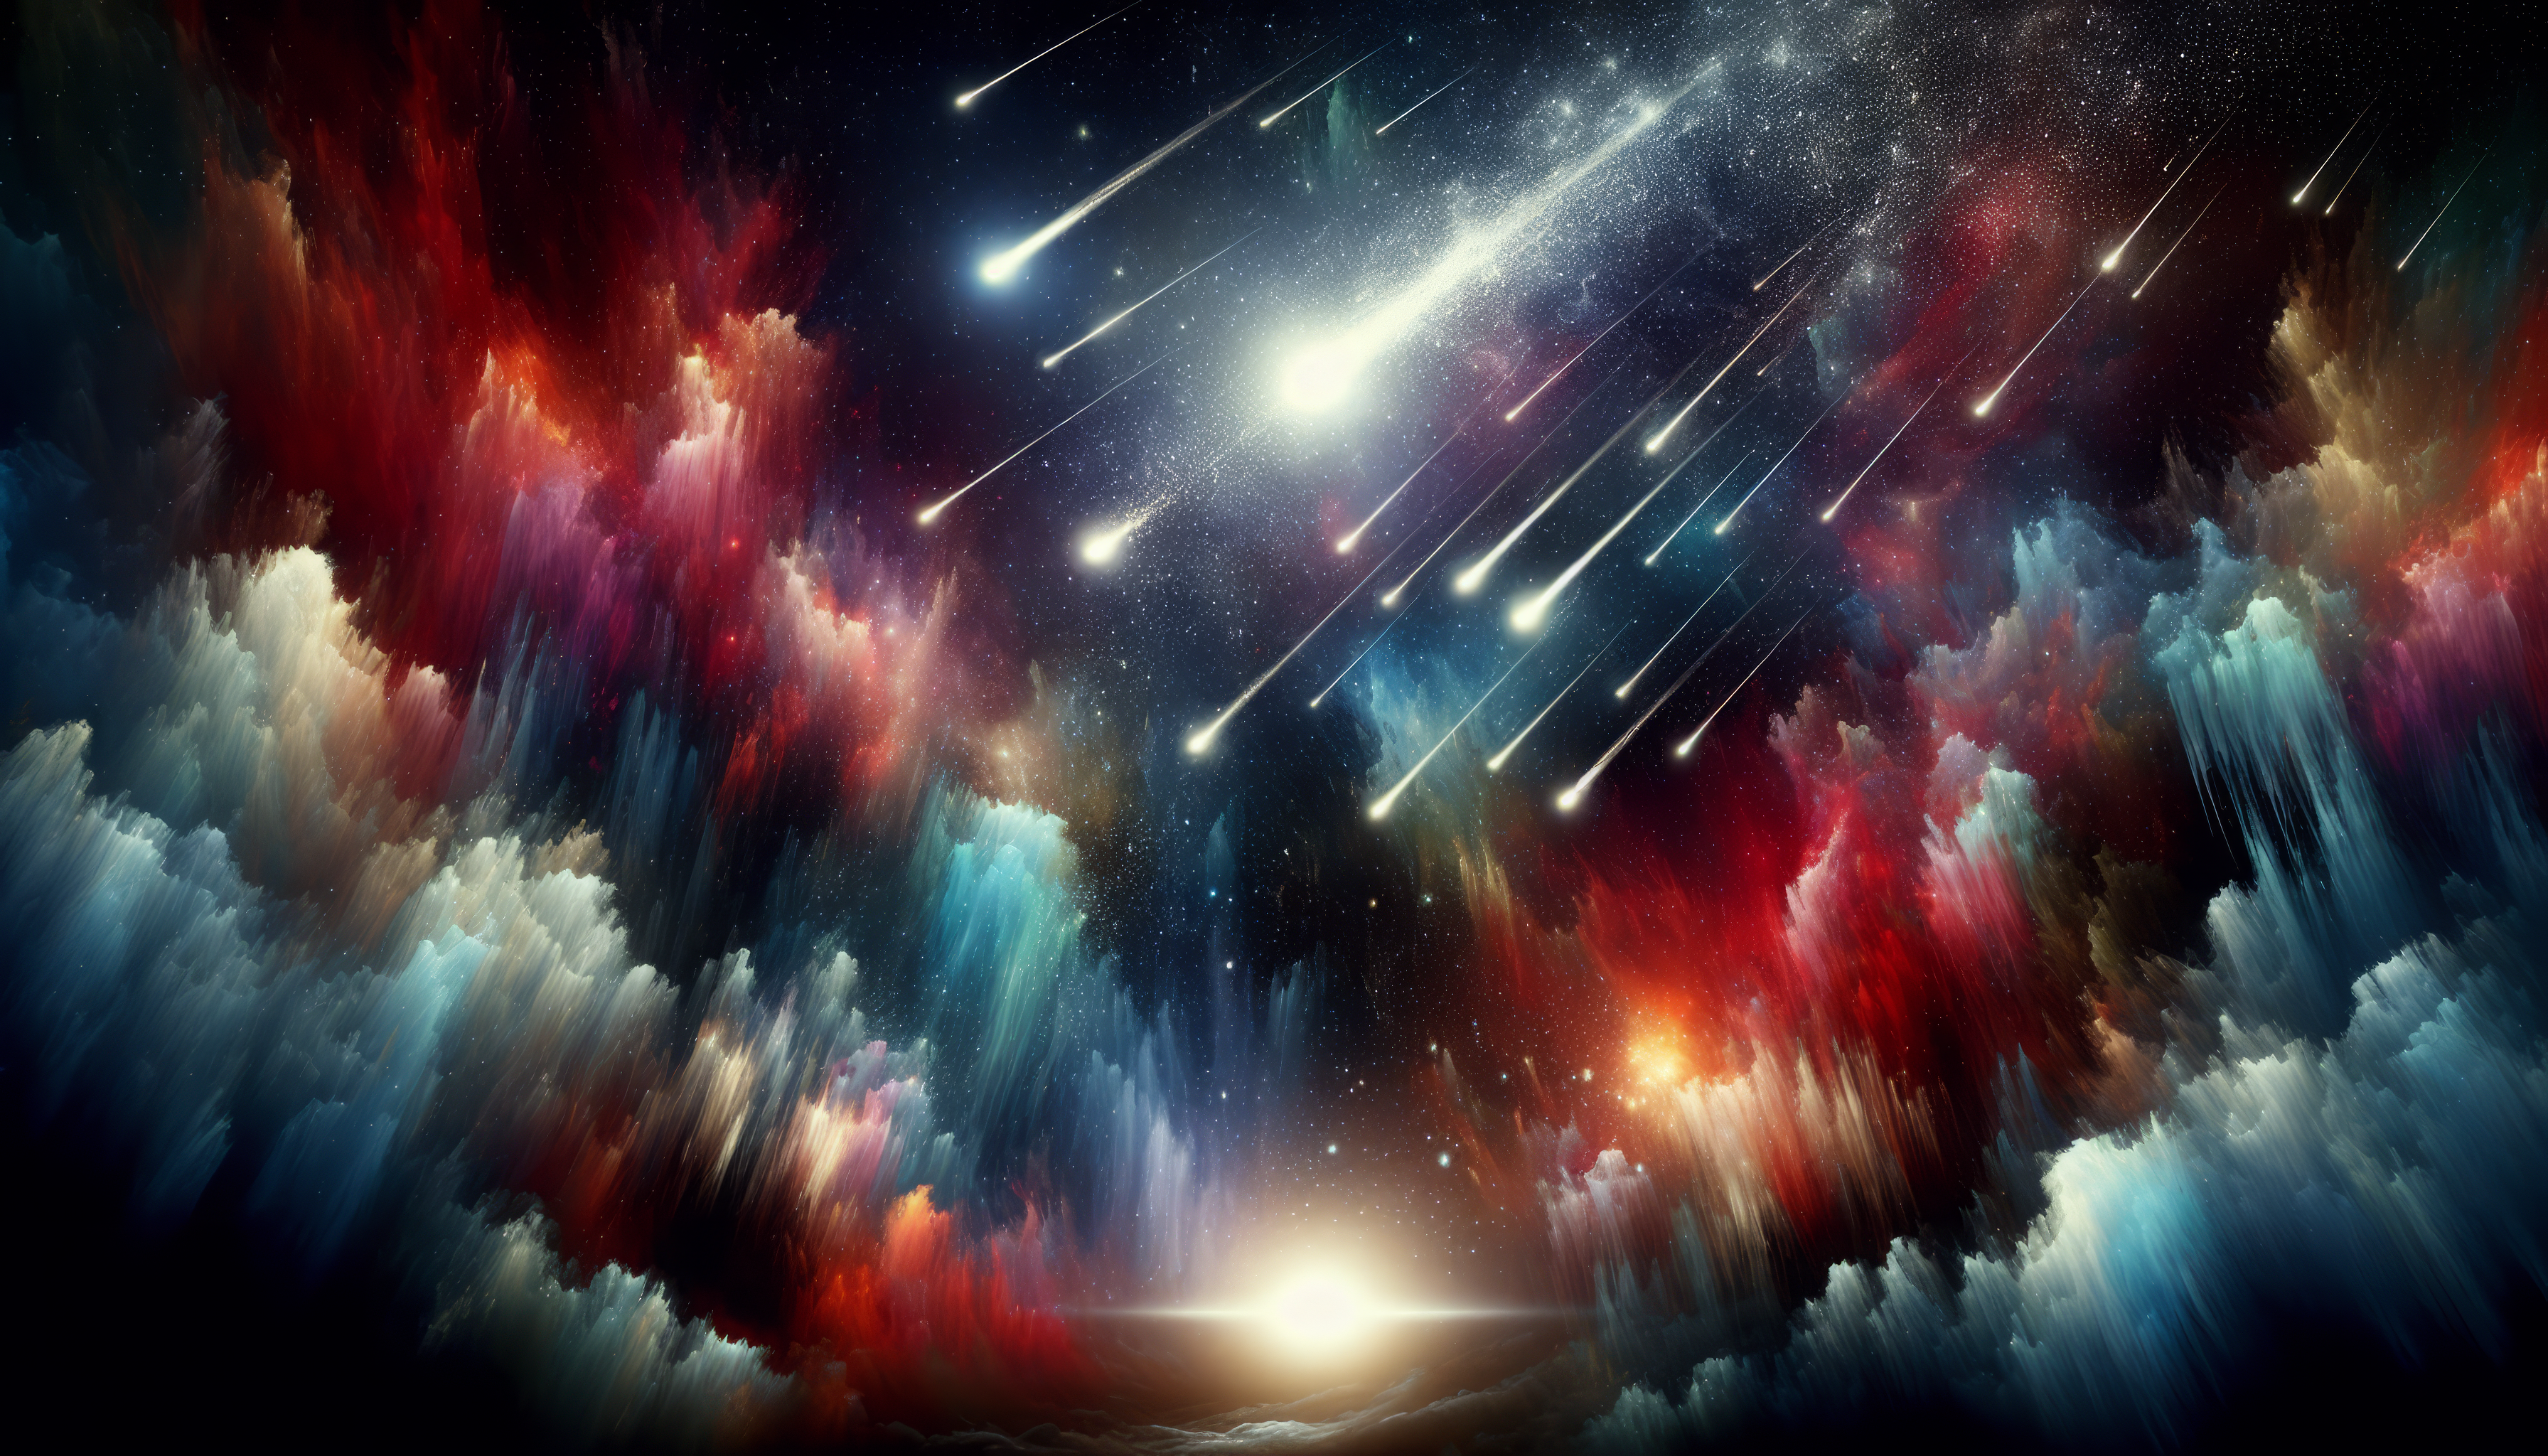 Vivid HD wallpaper of meteors streaking through a colorful cosmic sky, perfect for desktop backgrounds.